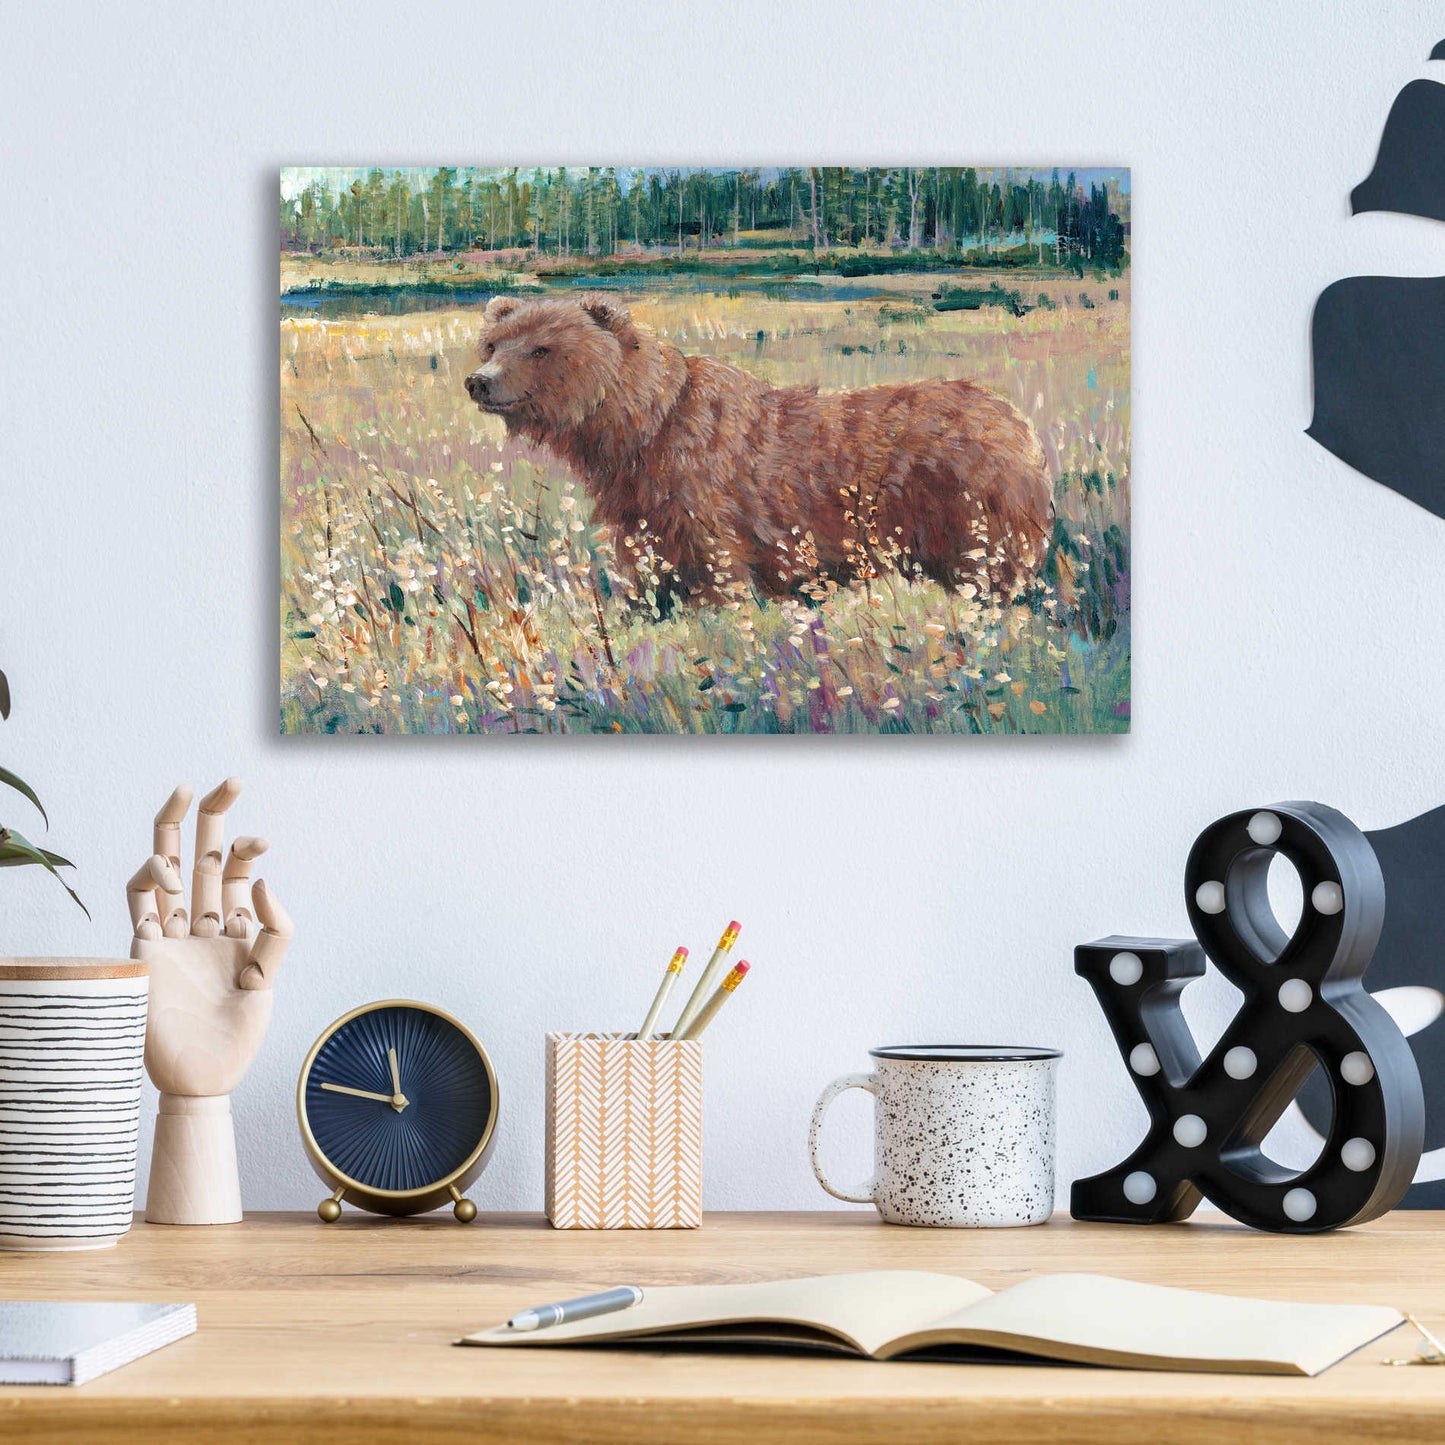 Epic Art 'Bear in the Field' by Tim O'Toole, Acrylic Glass Wall Art,16x12